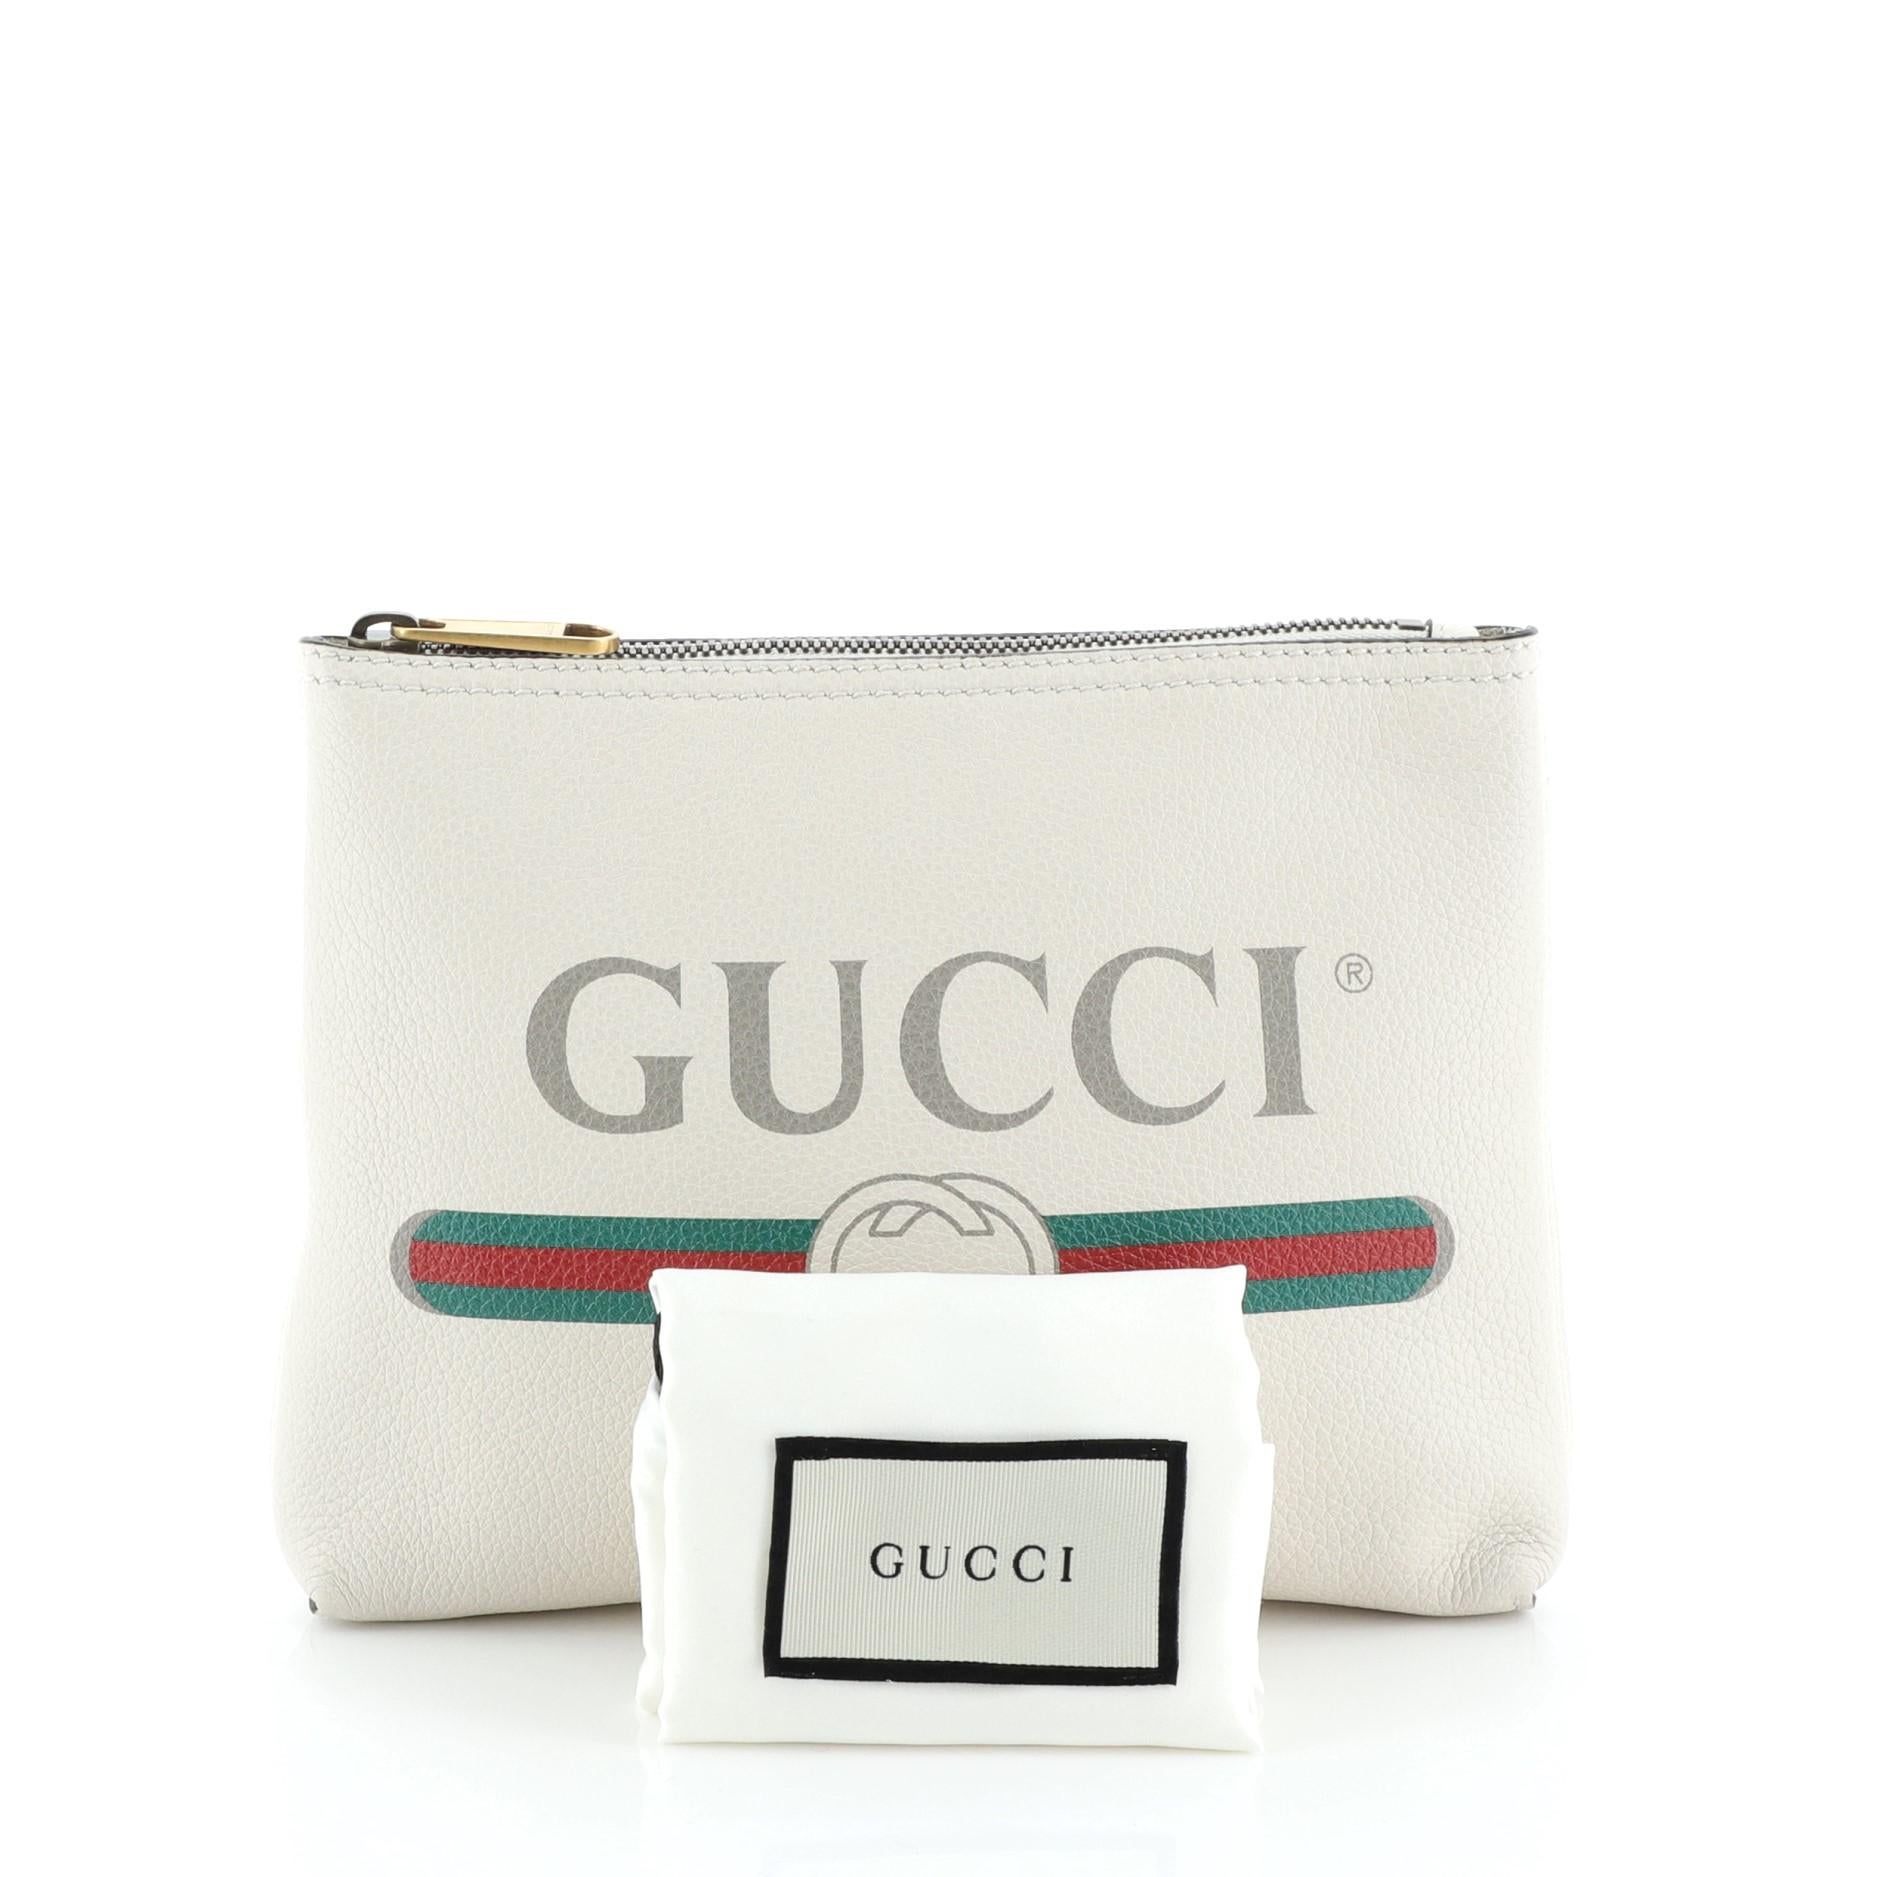 This Gucci Zipped Pouch Printed Leather Small, crafted from neutral printed leather, features Gucci vintage logo print and aged gold-tone hardware. Its zip closure opens to a neutral suede interior. 

Estimated Retail Price: $875
Condition: